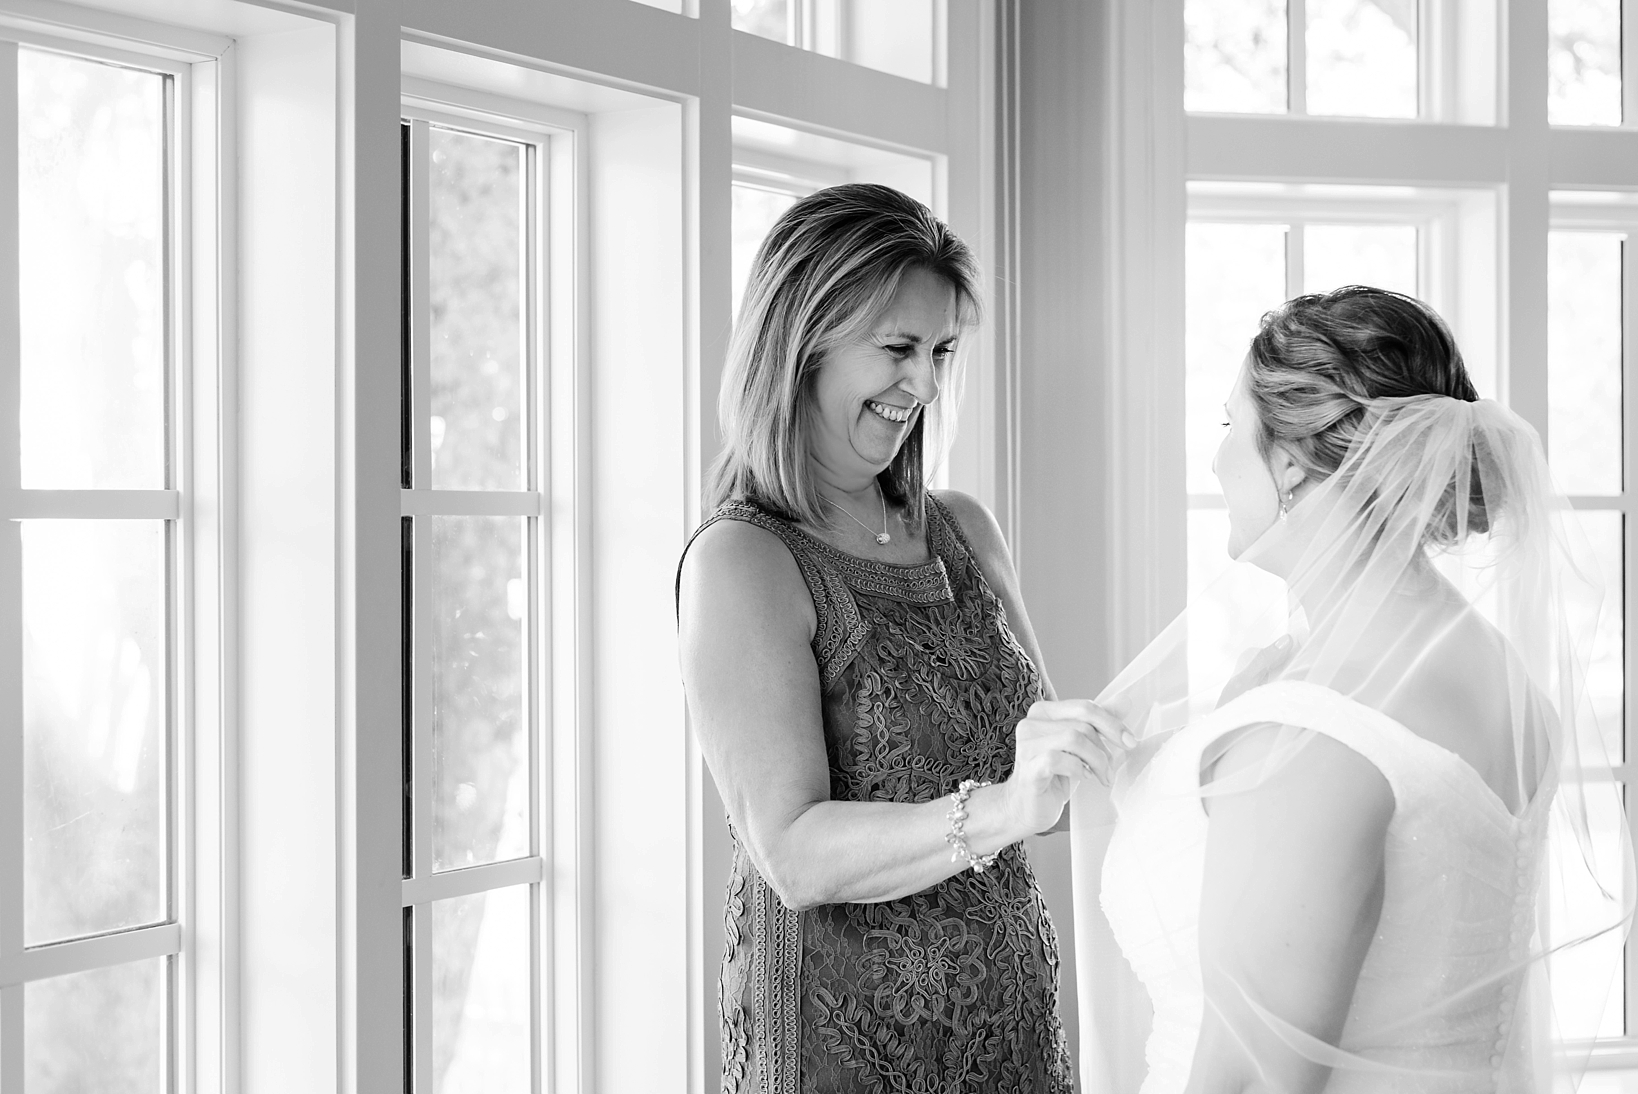 The Bride's mother assists with putting the veil on her daughter before her wedding